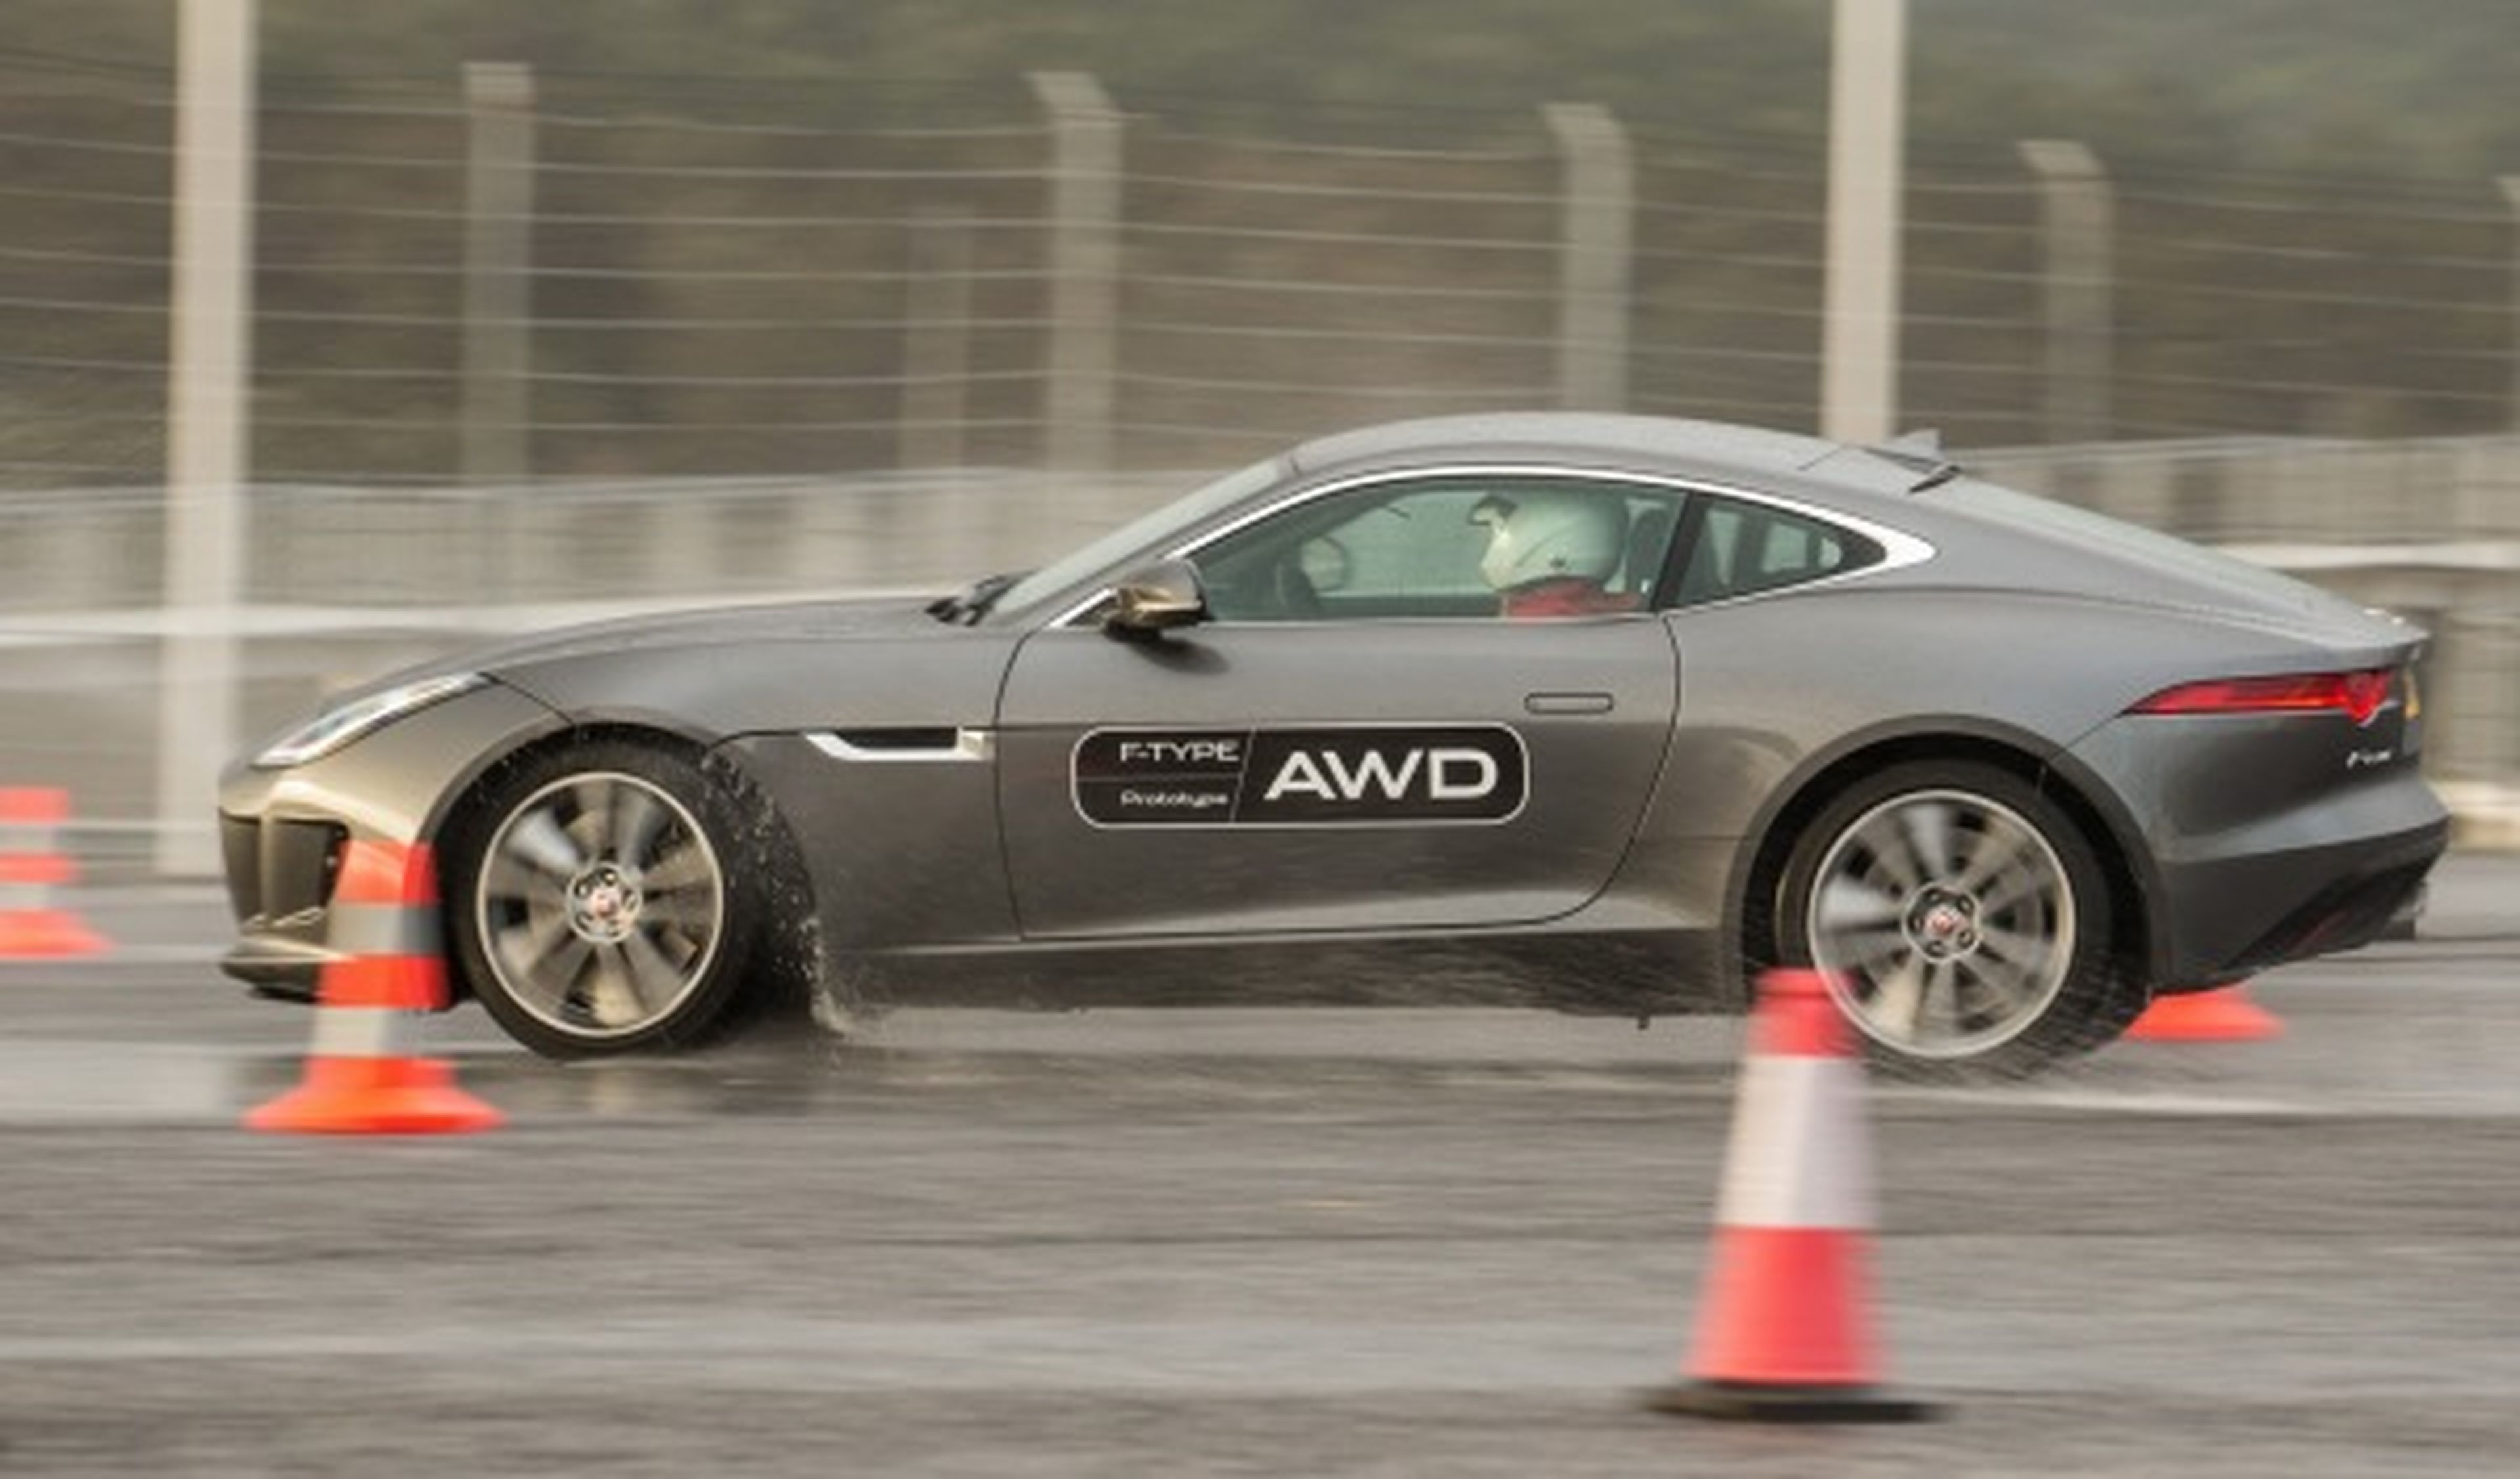 f-type-awd-lateral-peq